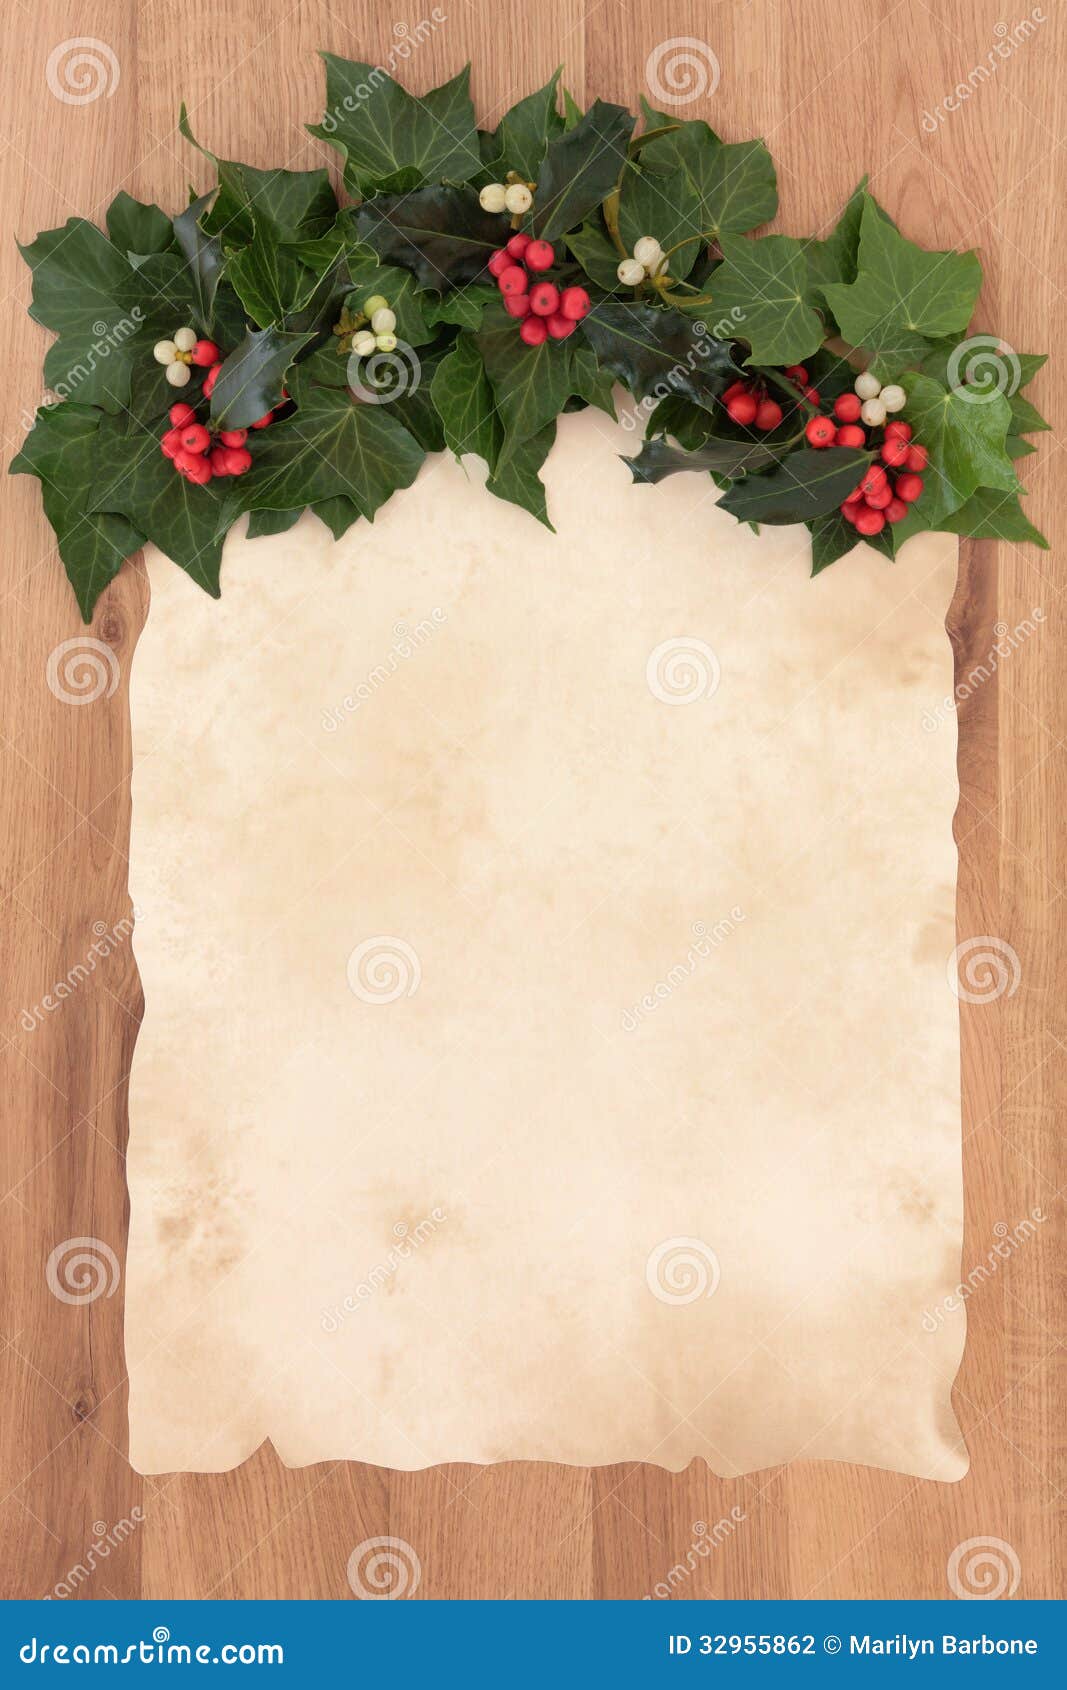 Parchment Paper Christmas: Over 3,421 Royalty-Free Licensable